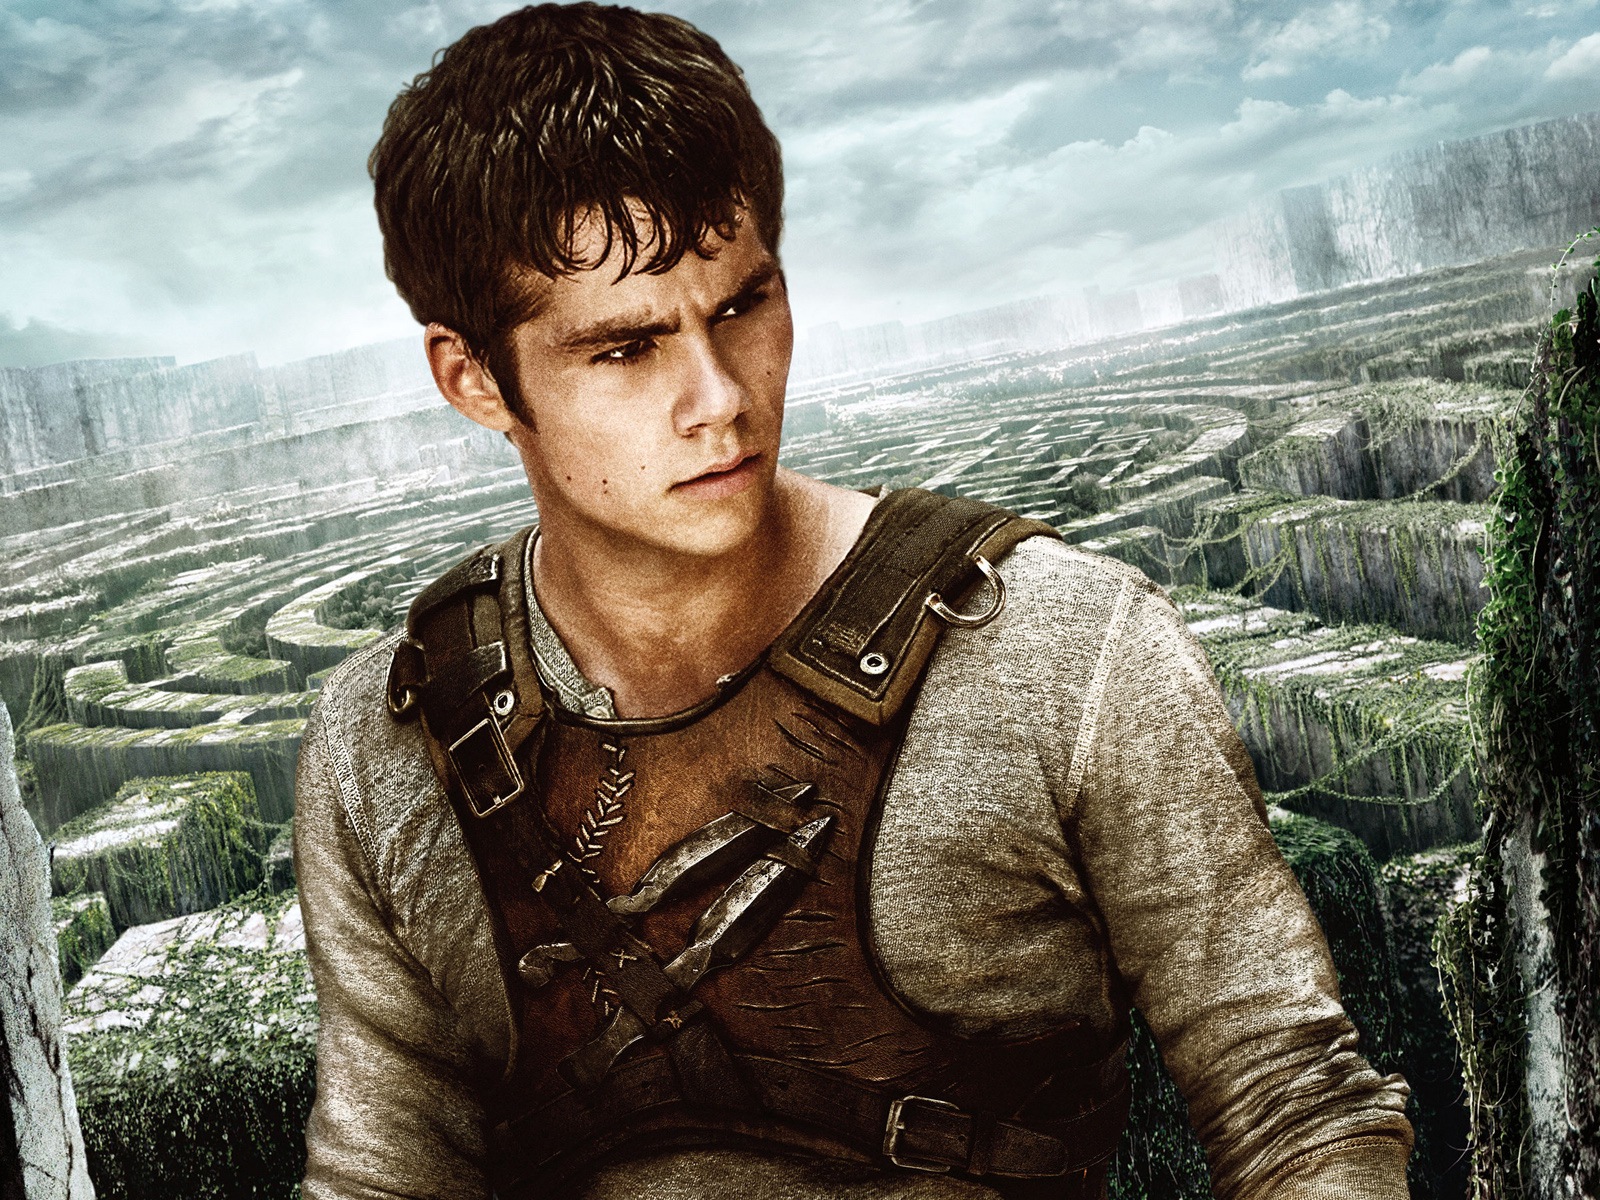 The Maze Runner HD movie wallpapers #7 - 1600x1200